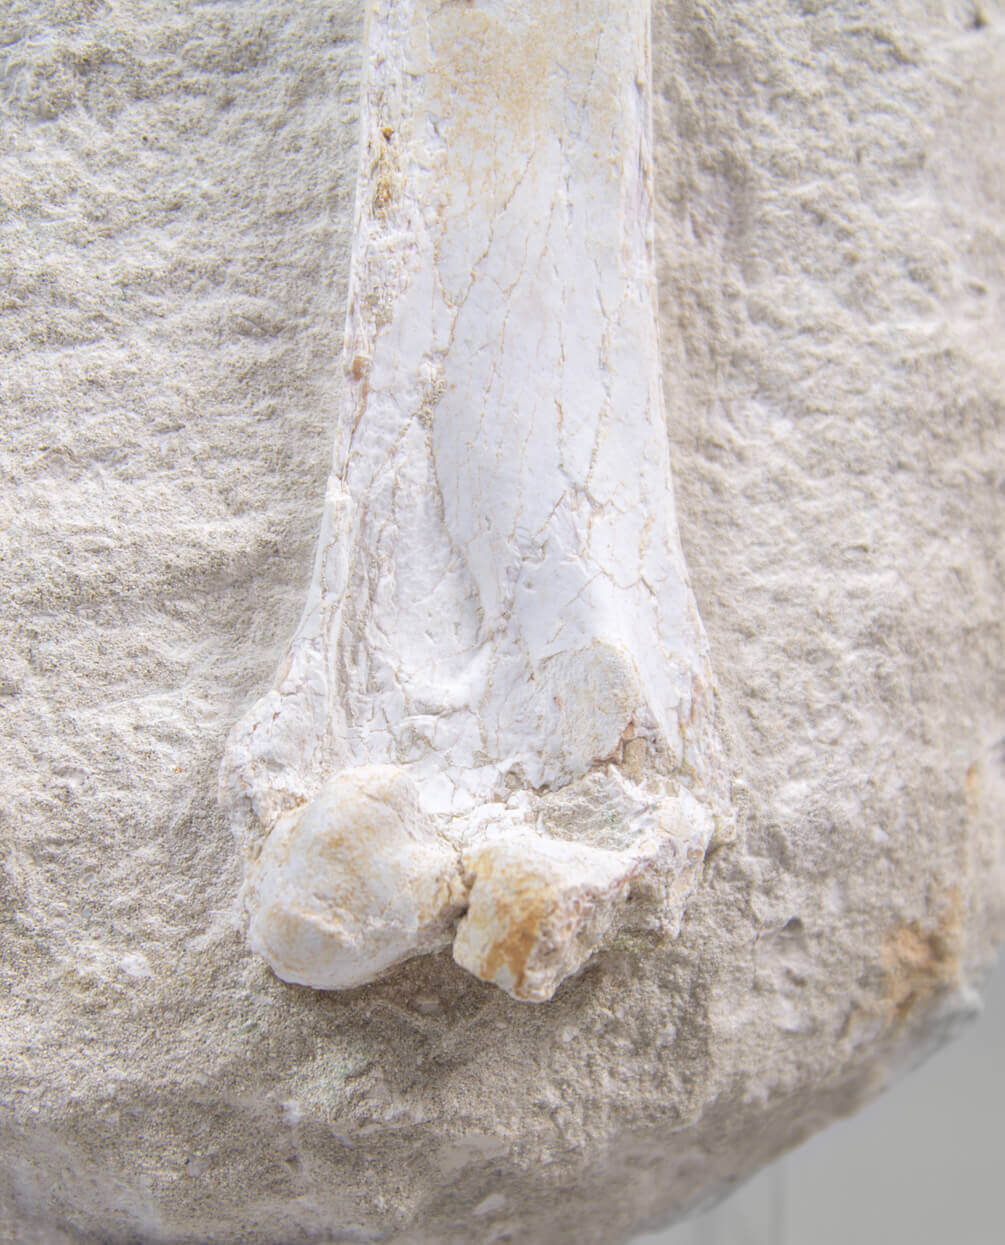 A museum-standard rare fossil Odontopteryx gigas bird bone for sale measuring 1.7 feet at THE FOSSIL STORE